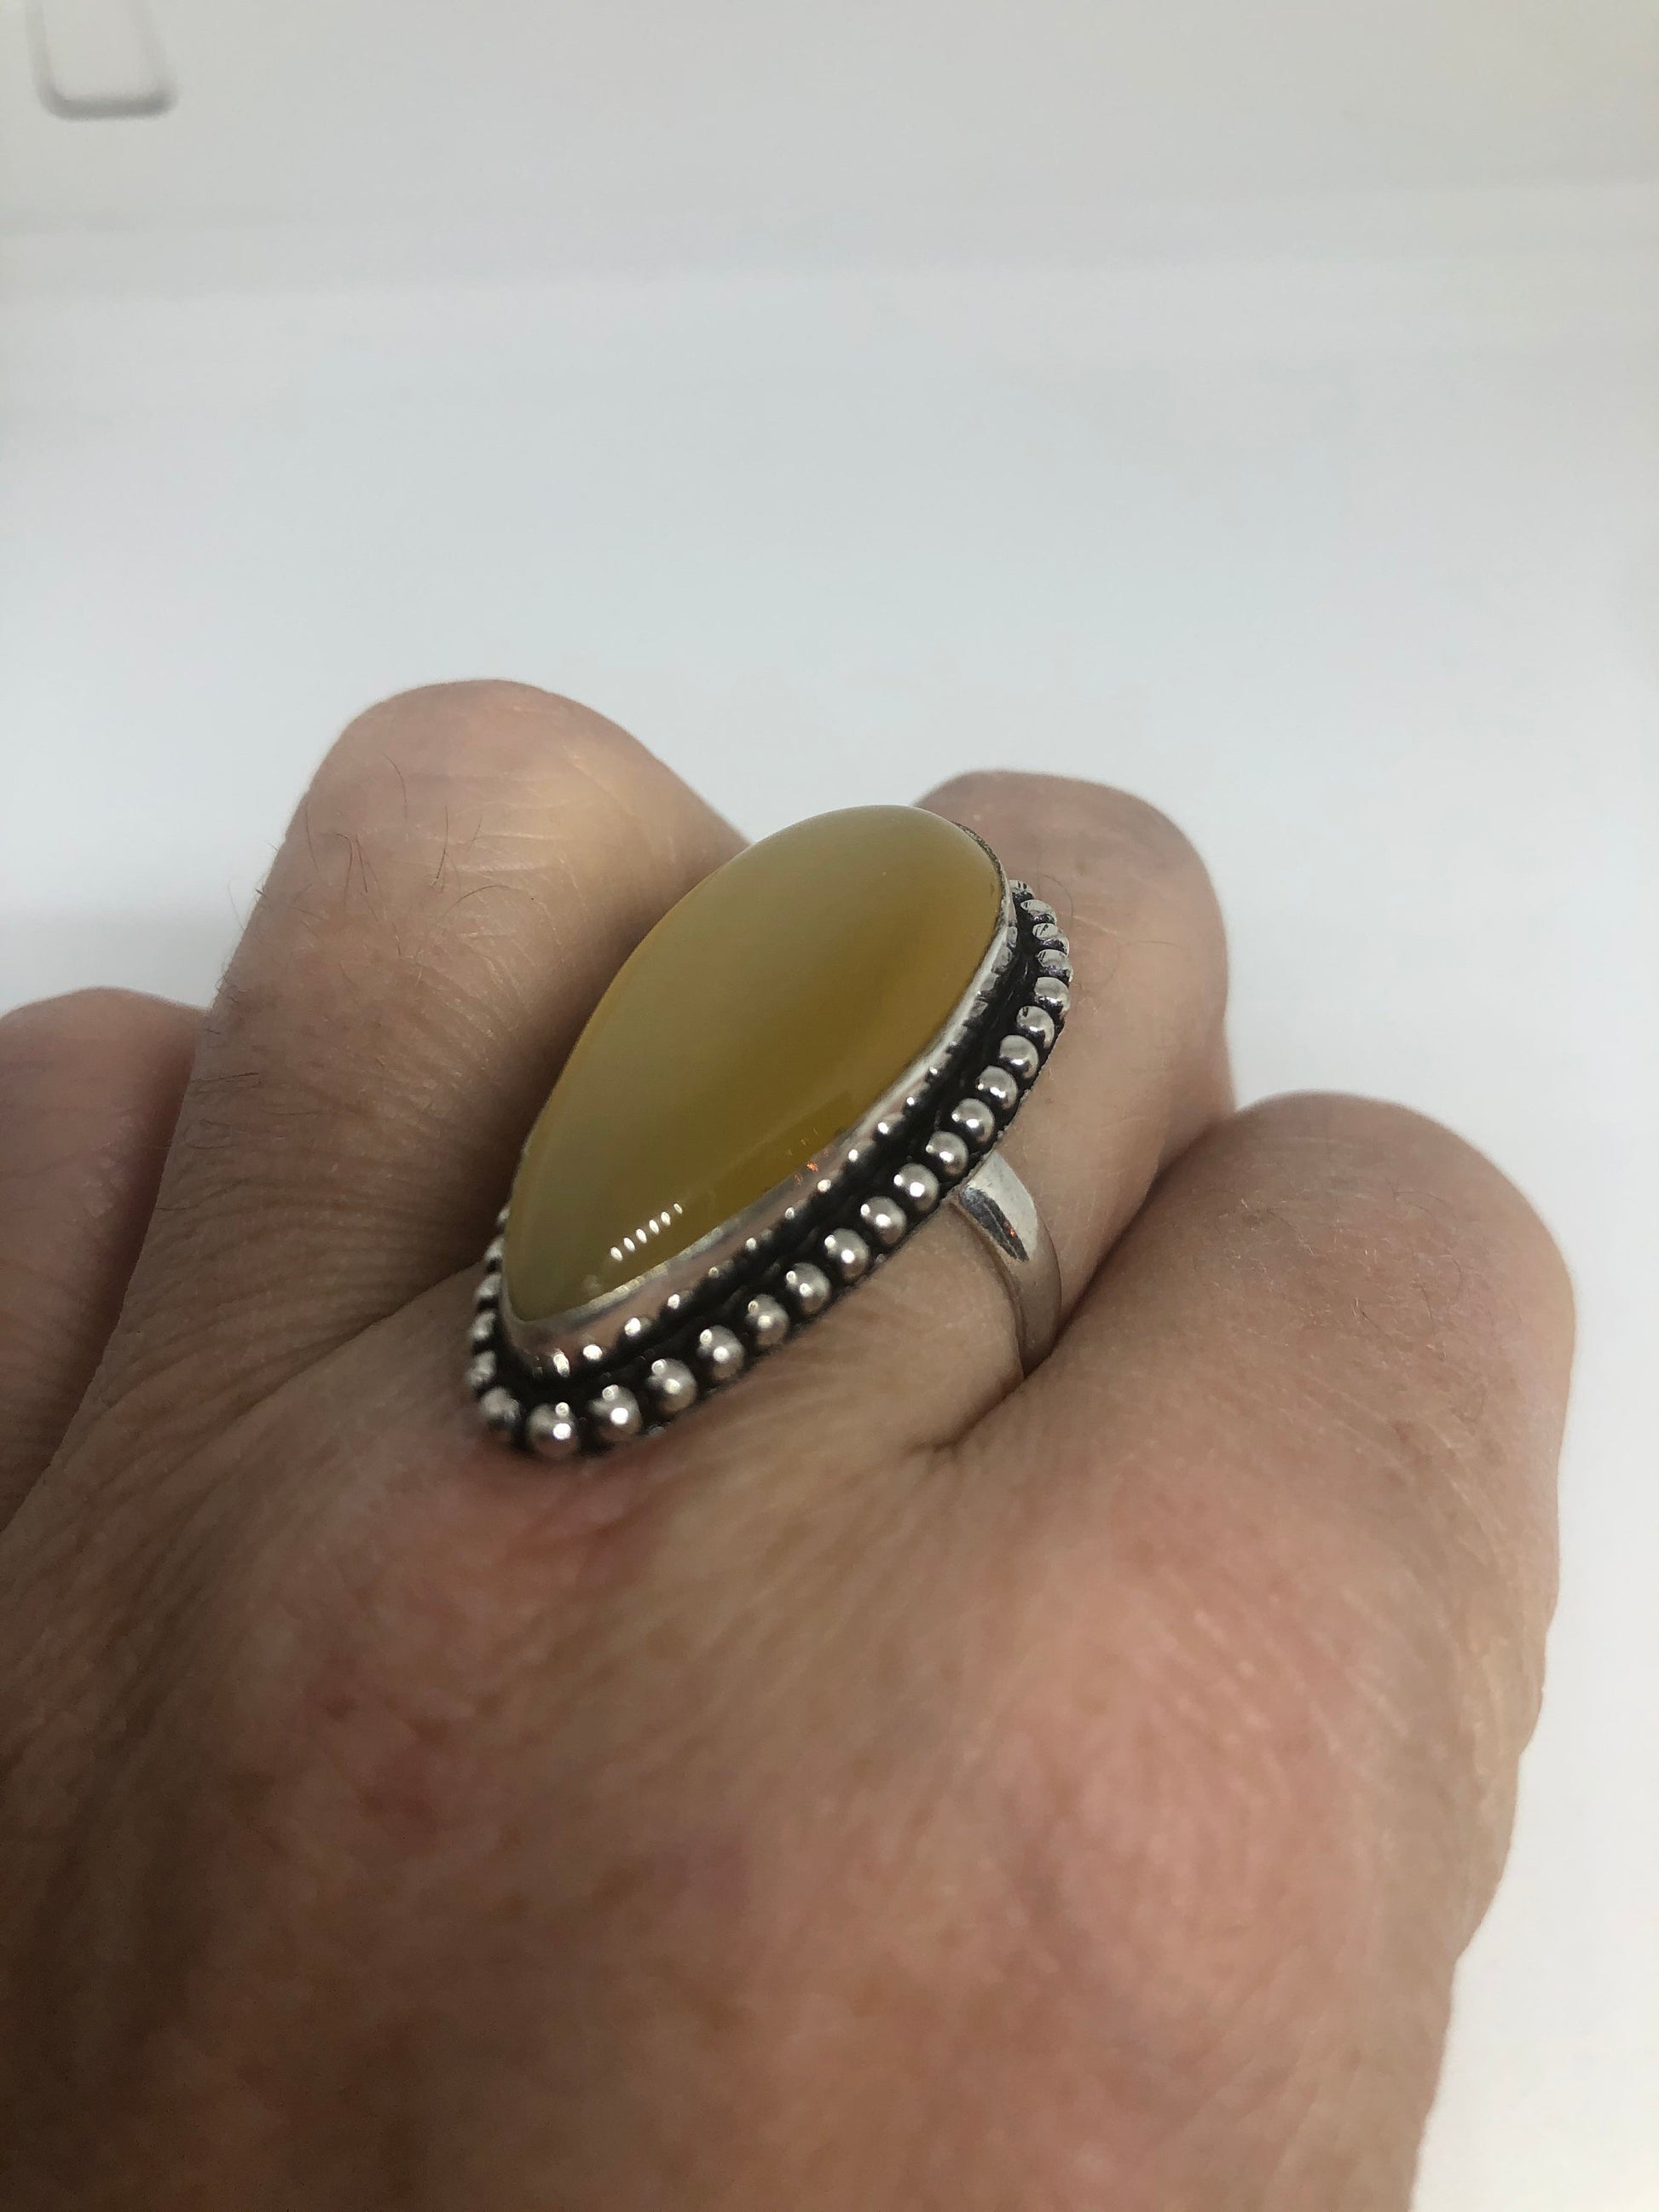 Vintage Yellow Cats Eye Art Glass Ring Size 7